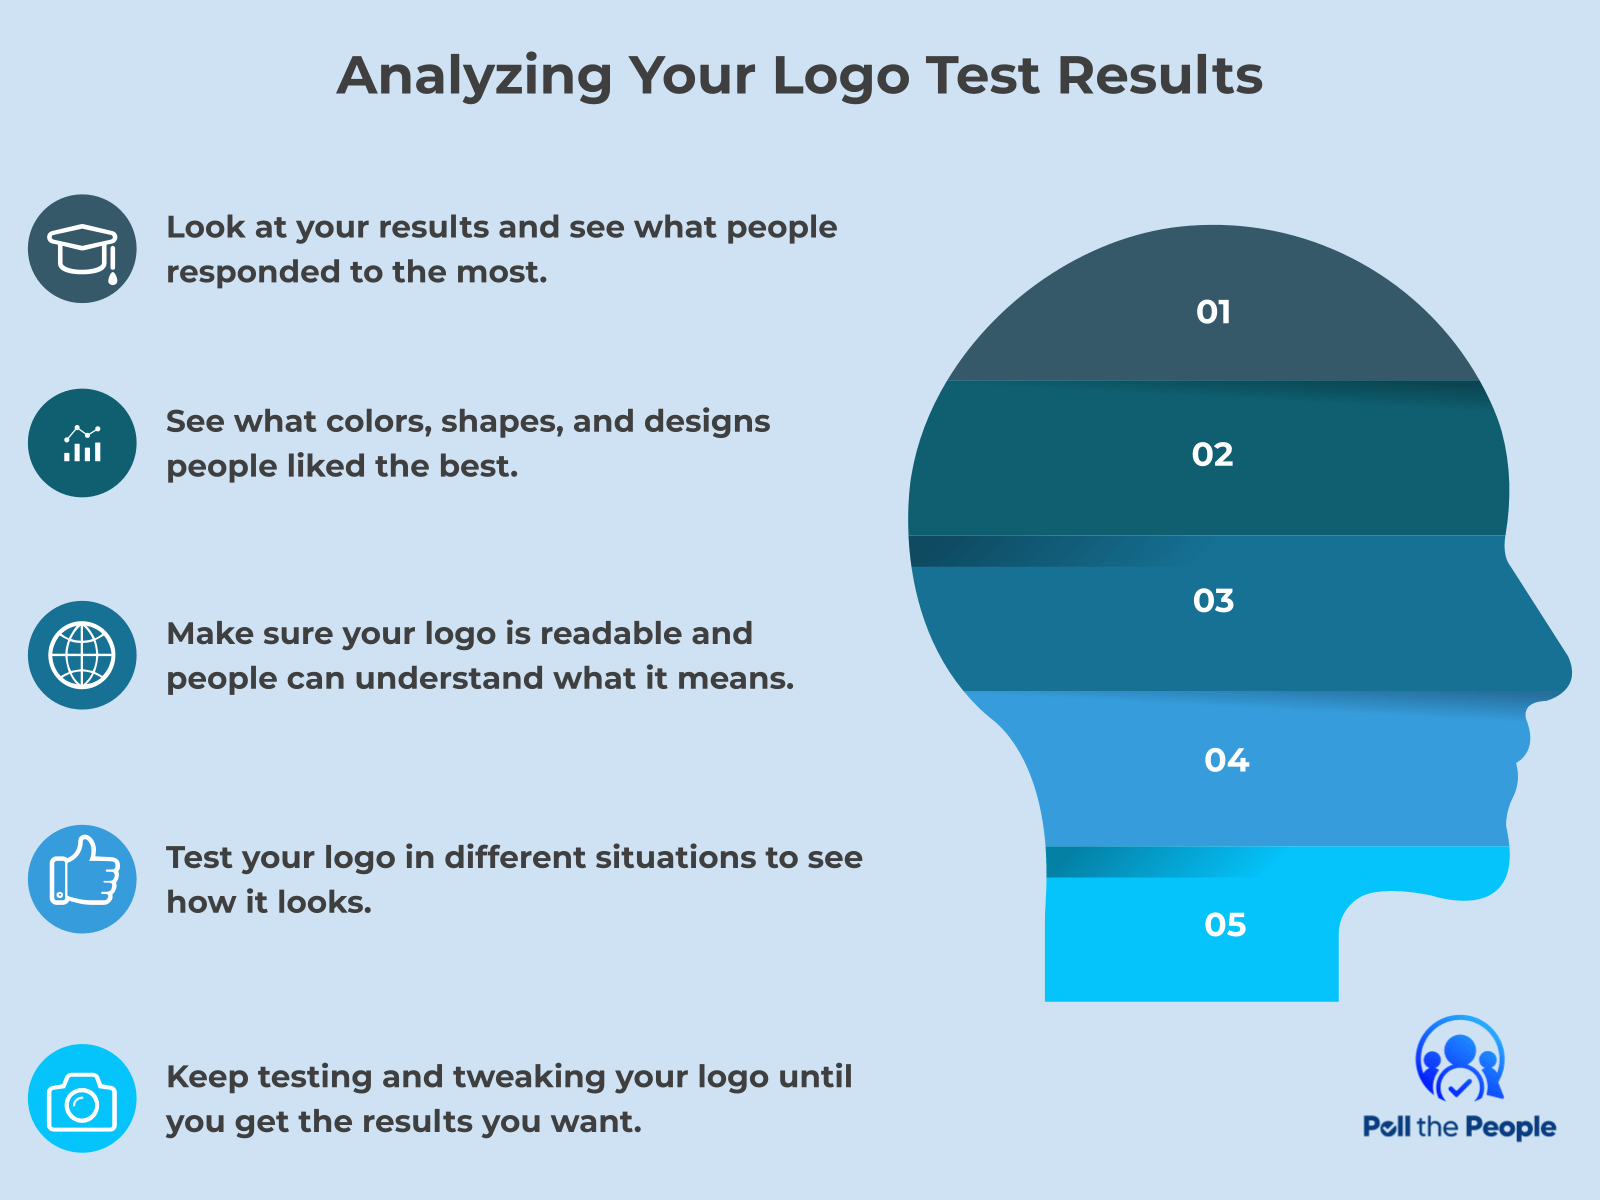 INFOGRAPHIC: Analyzing Your Logo Test Results - Poll the People